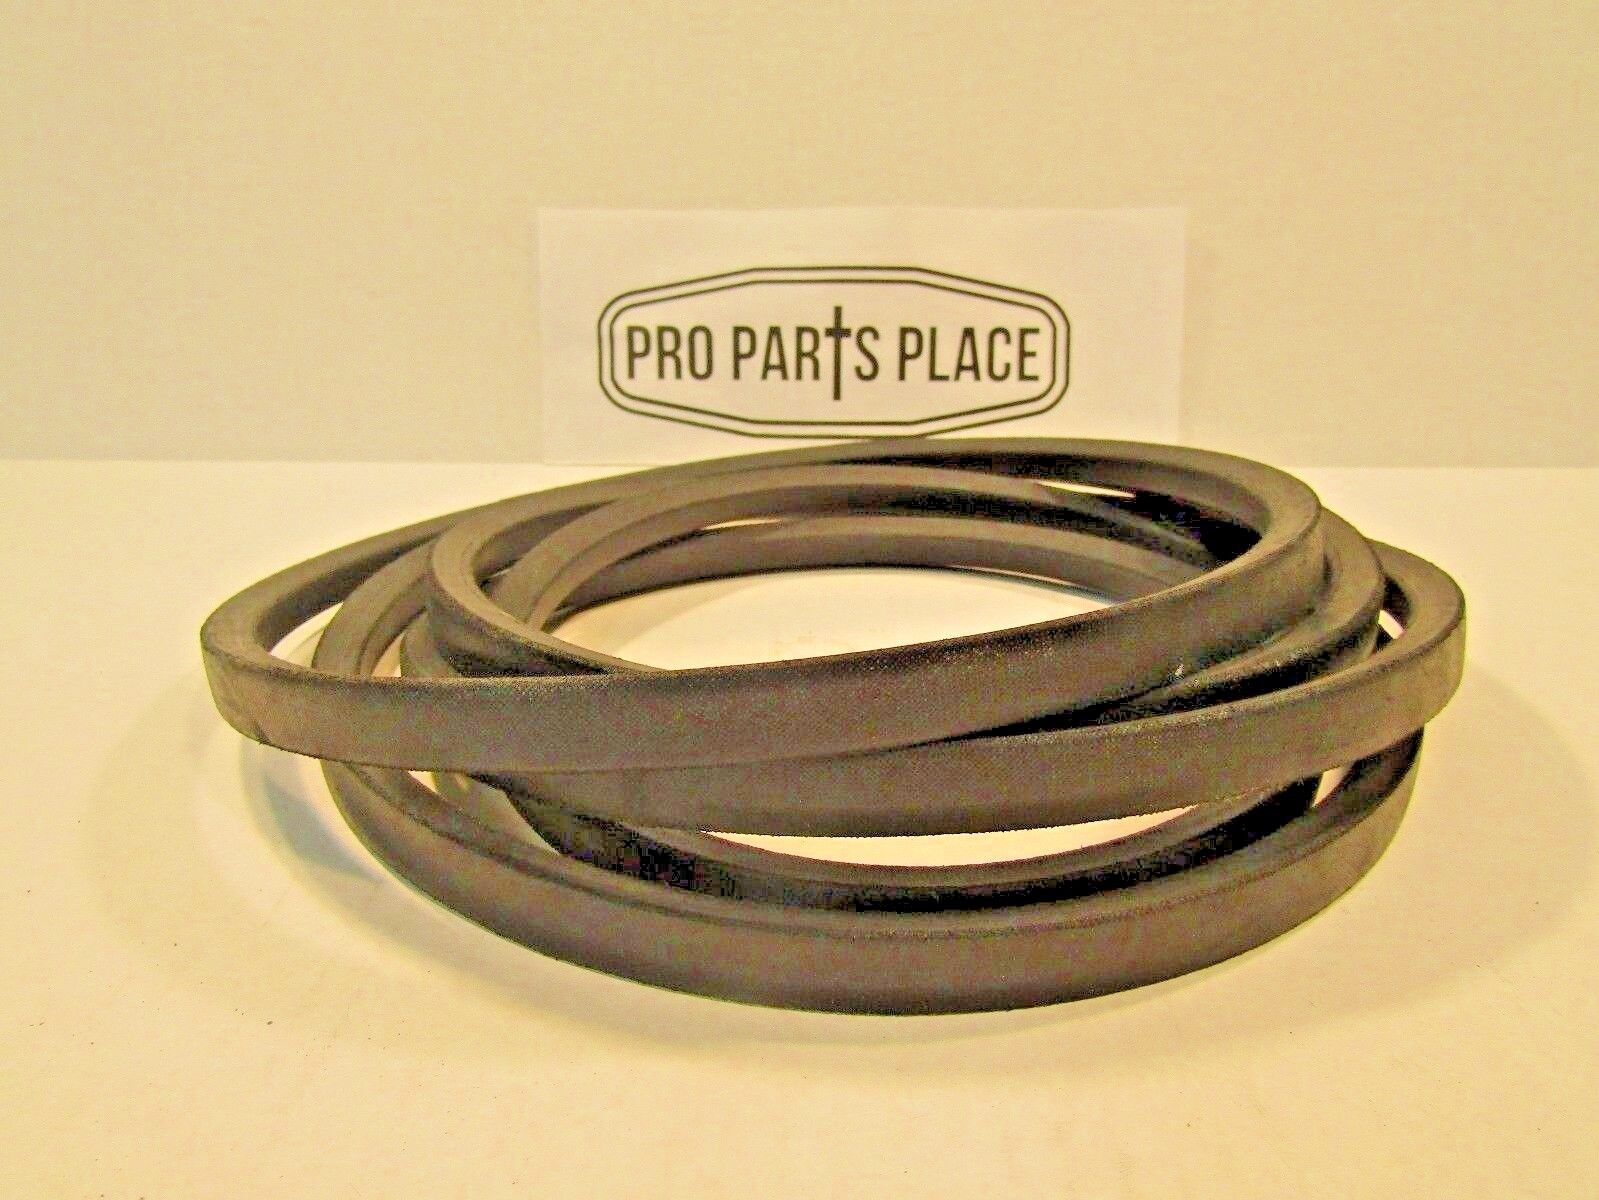 REPLACEMENT BELT FOR SCAG 483243 DRIVE BELT FOR 61" ZTR TIGER CUB